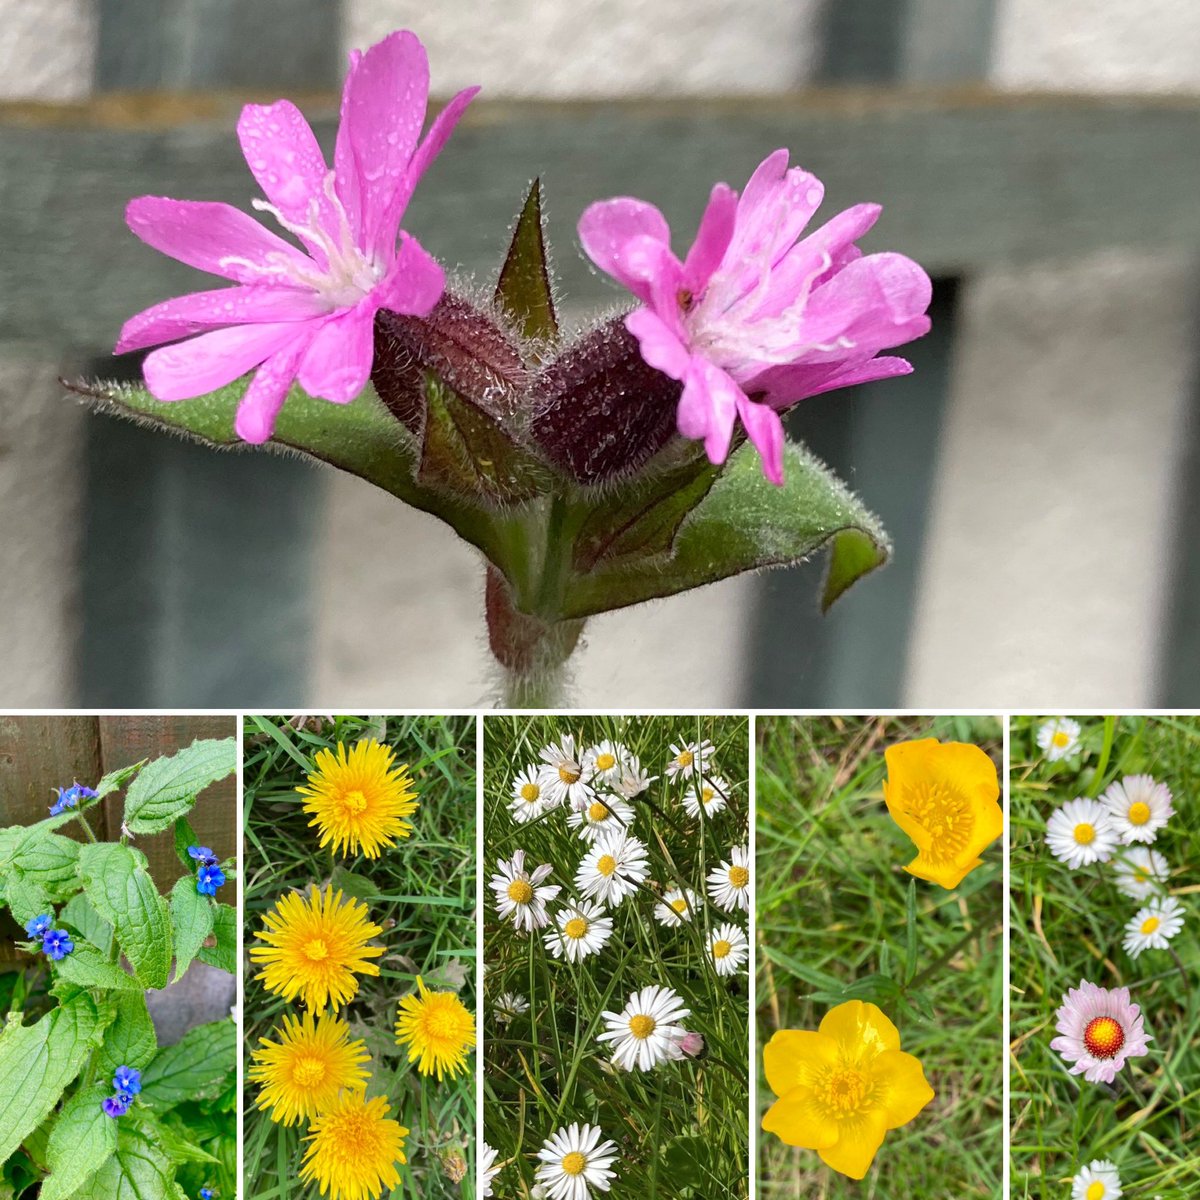 Good morning with wildflowers from my garden for #SixOnSaturday and #NoMowMay Have a fun weekend! #flowers #wildflowers #garden #NatureBeauty #flowerphotography